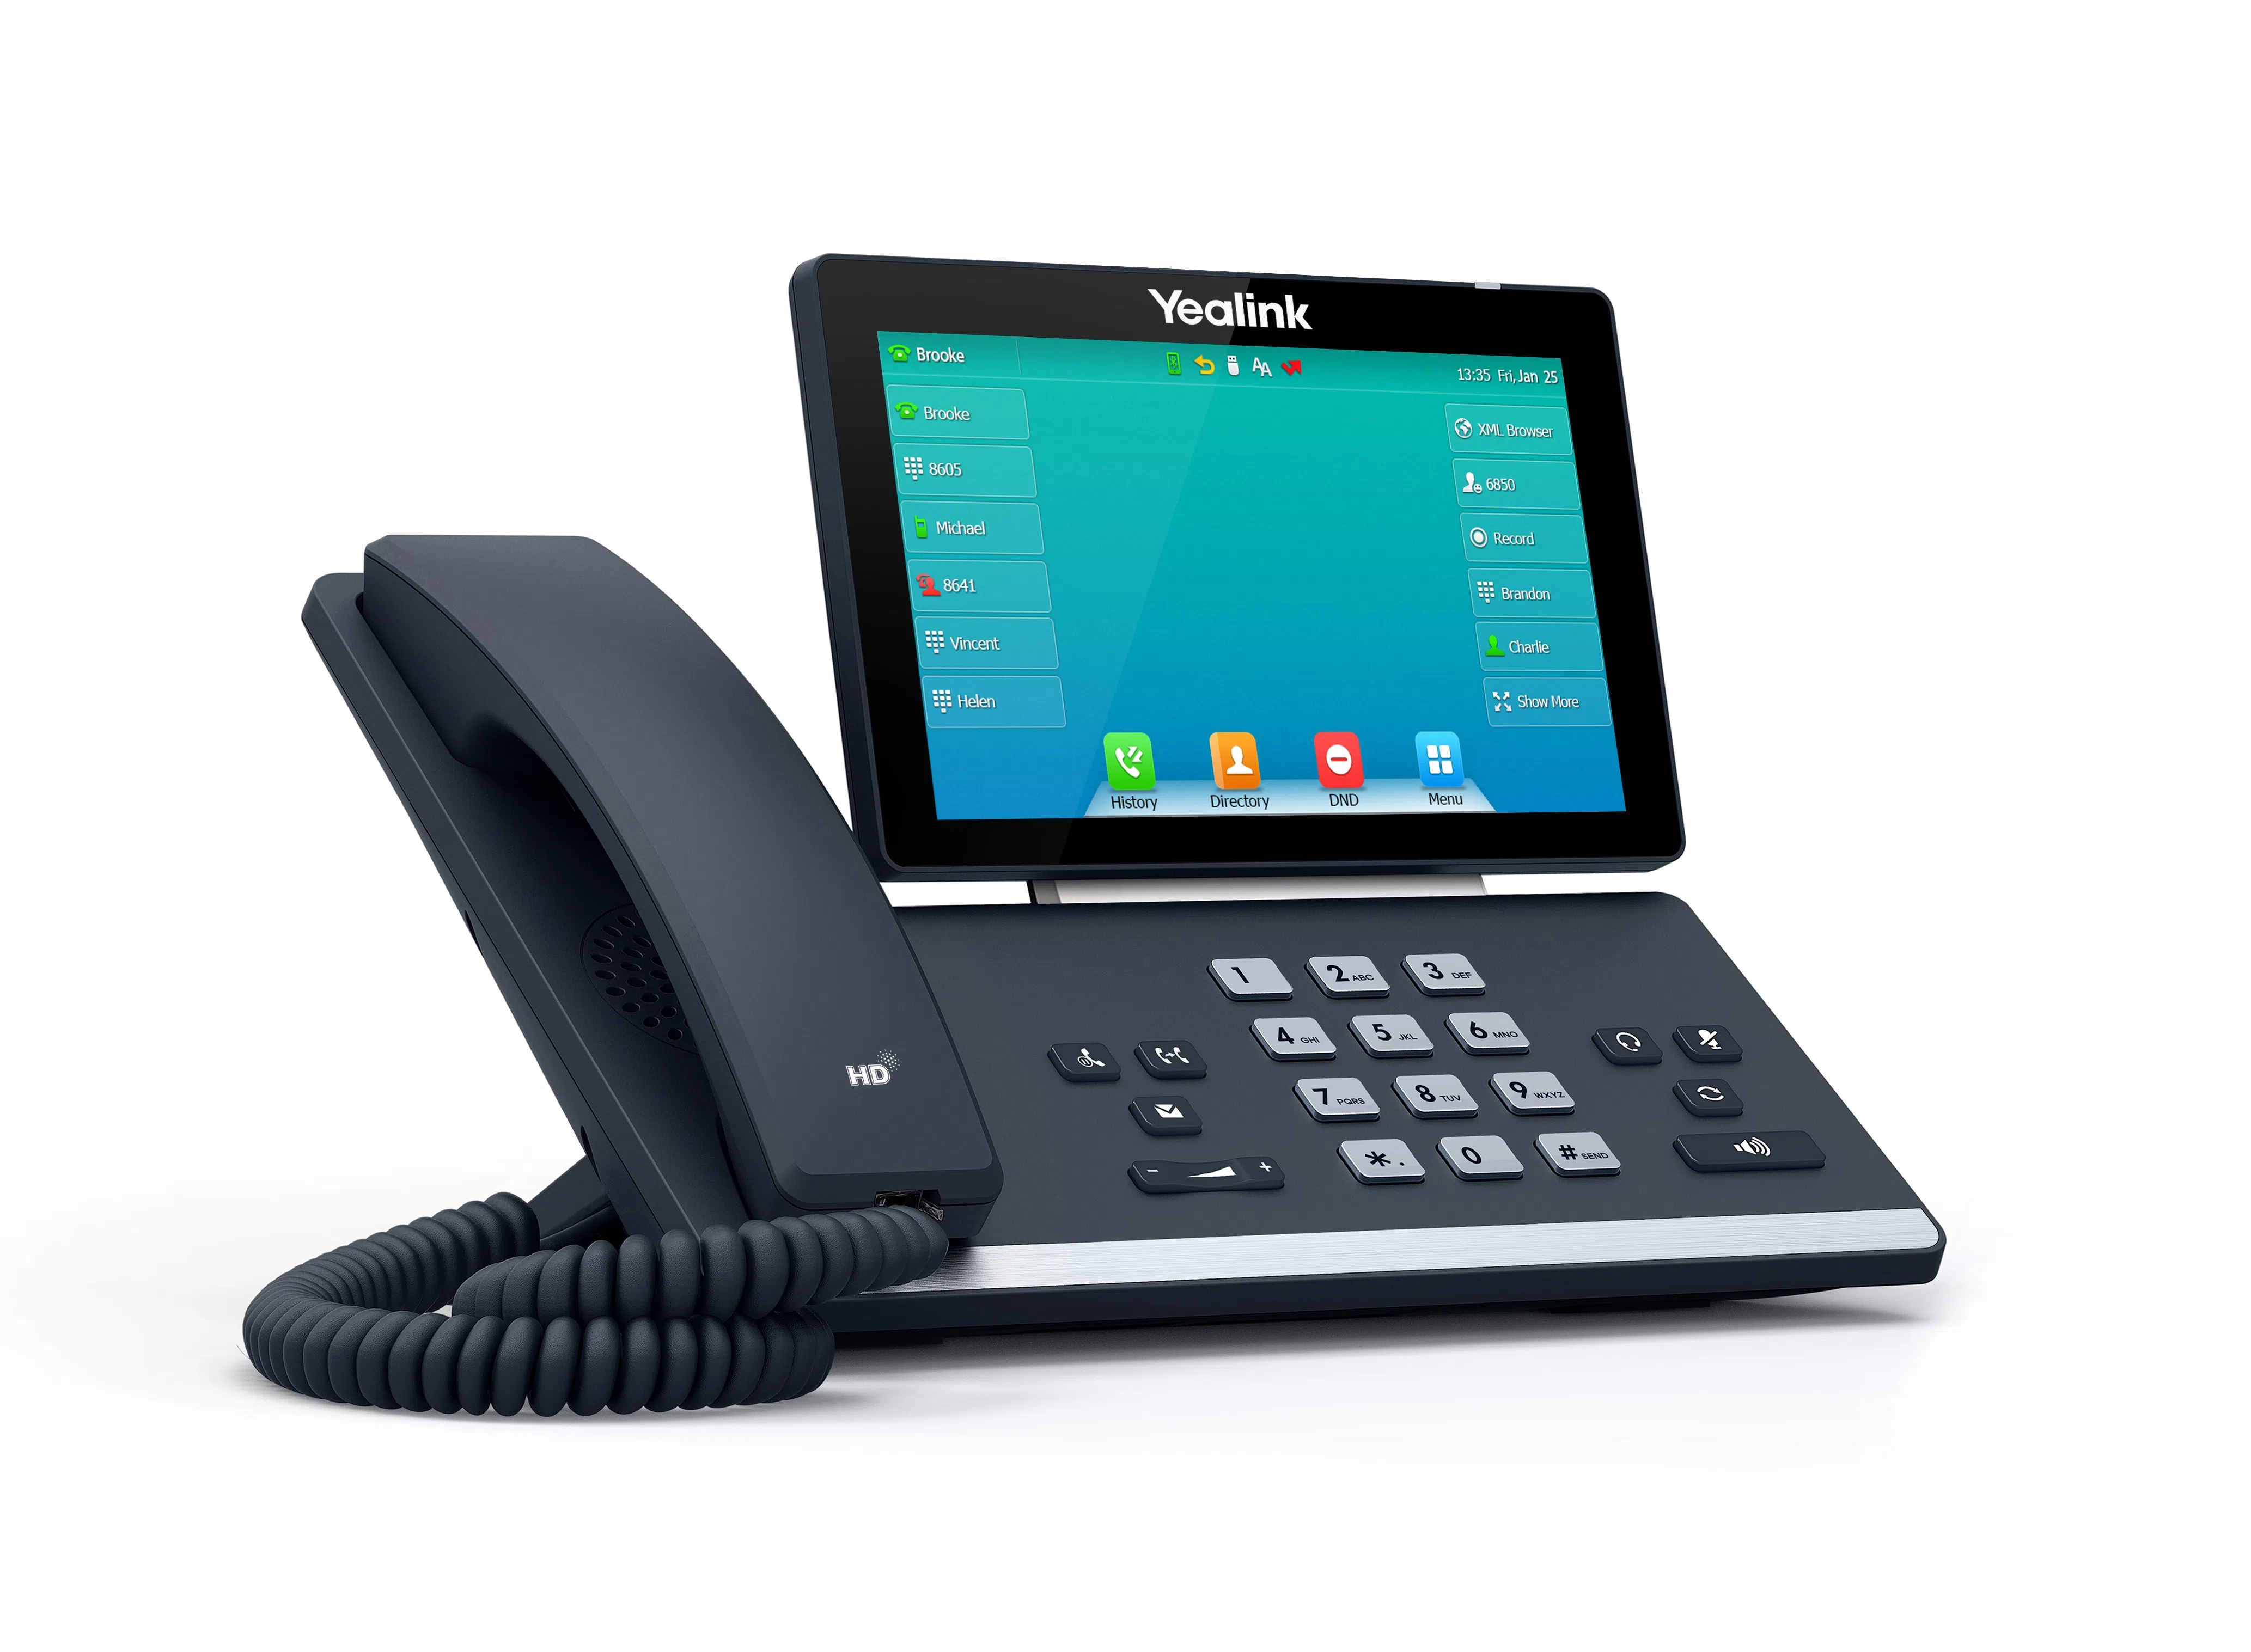 What's the display resolution of the yealink t57w Premium IP Phone?